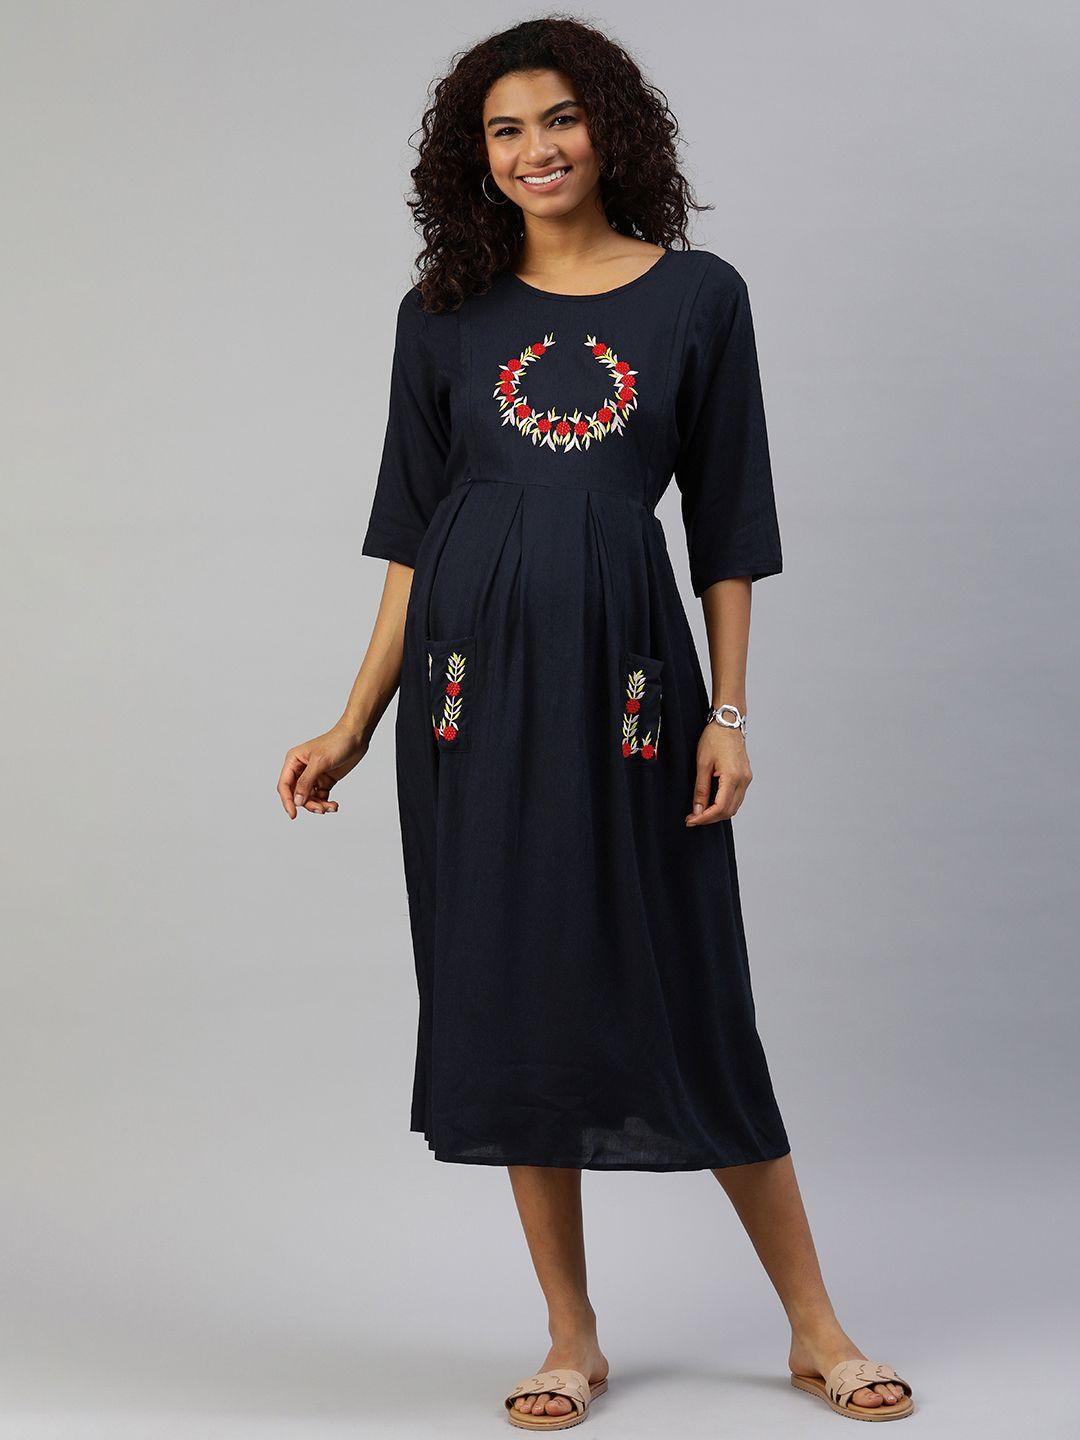 momtobe navy blue embroidered cotton a-line maternity nursing dress